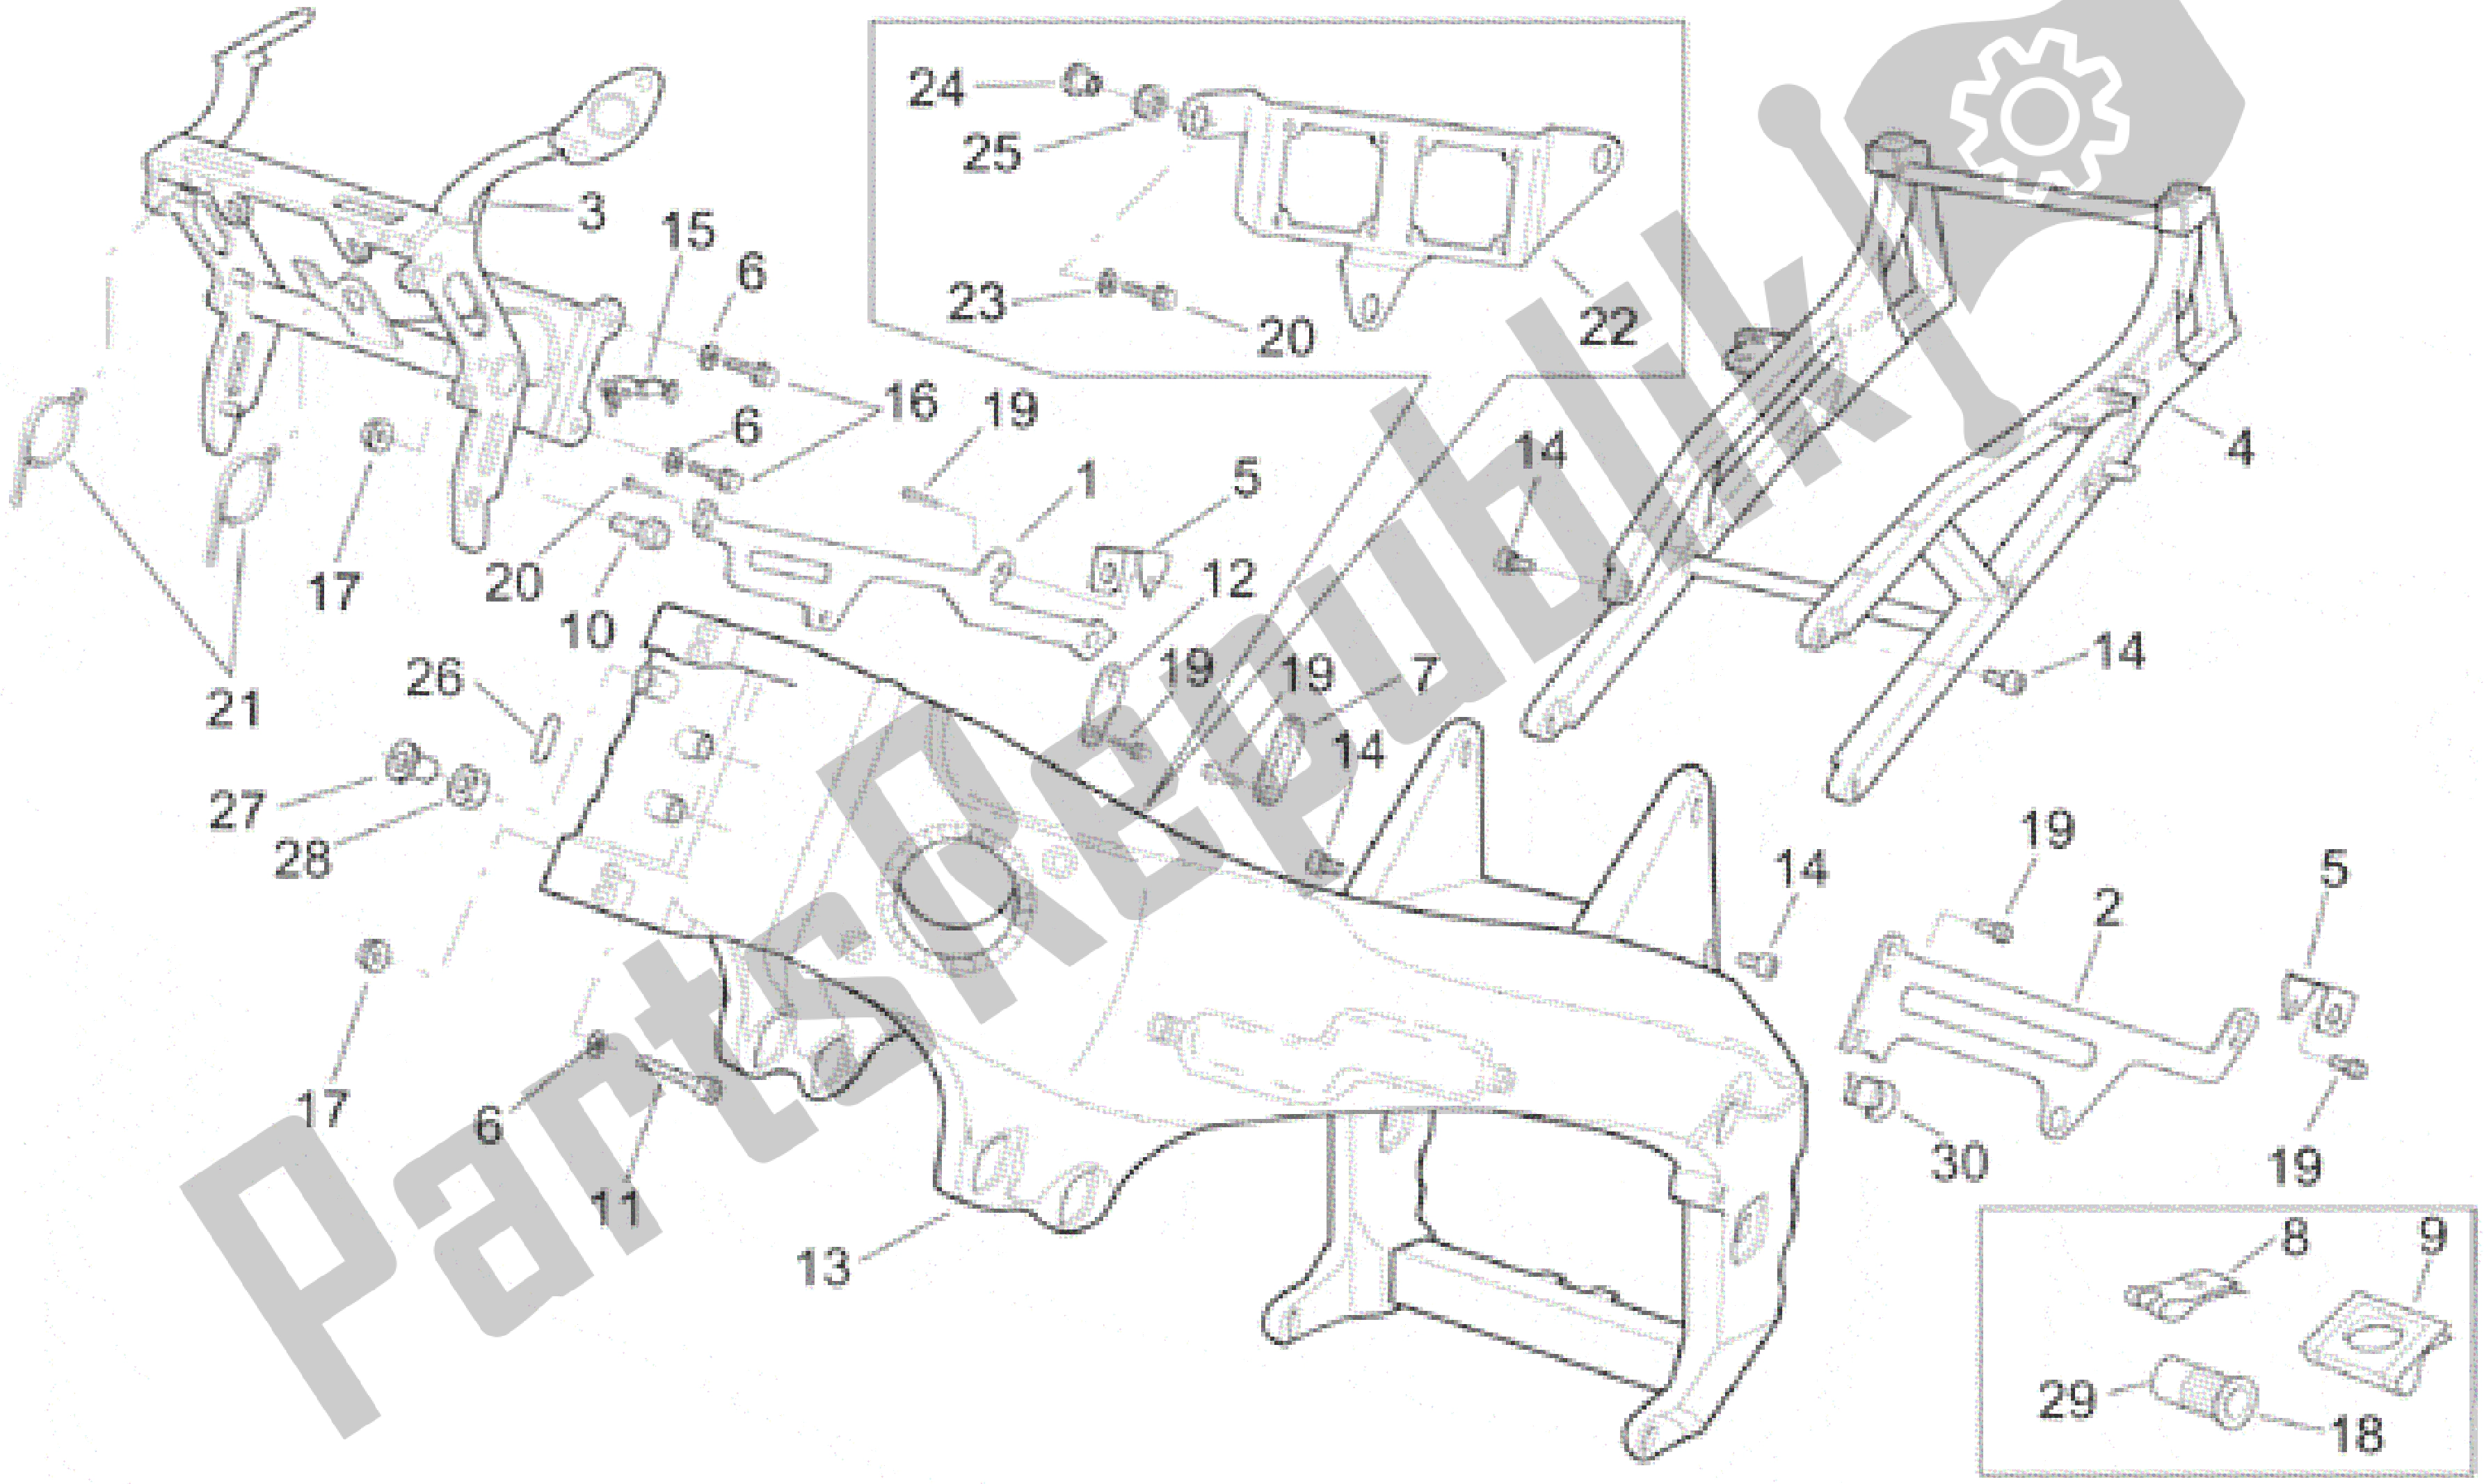 All parts for the Frame I of the Aprilia RSV Mille SP 391 X 1000 1999 - 2000